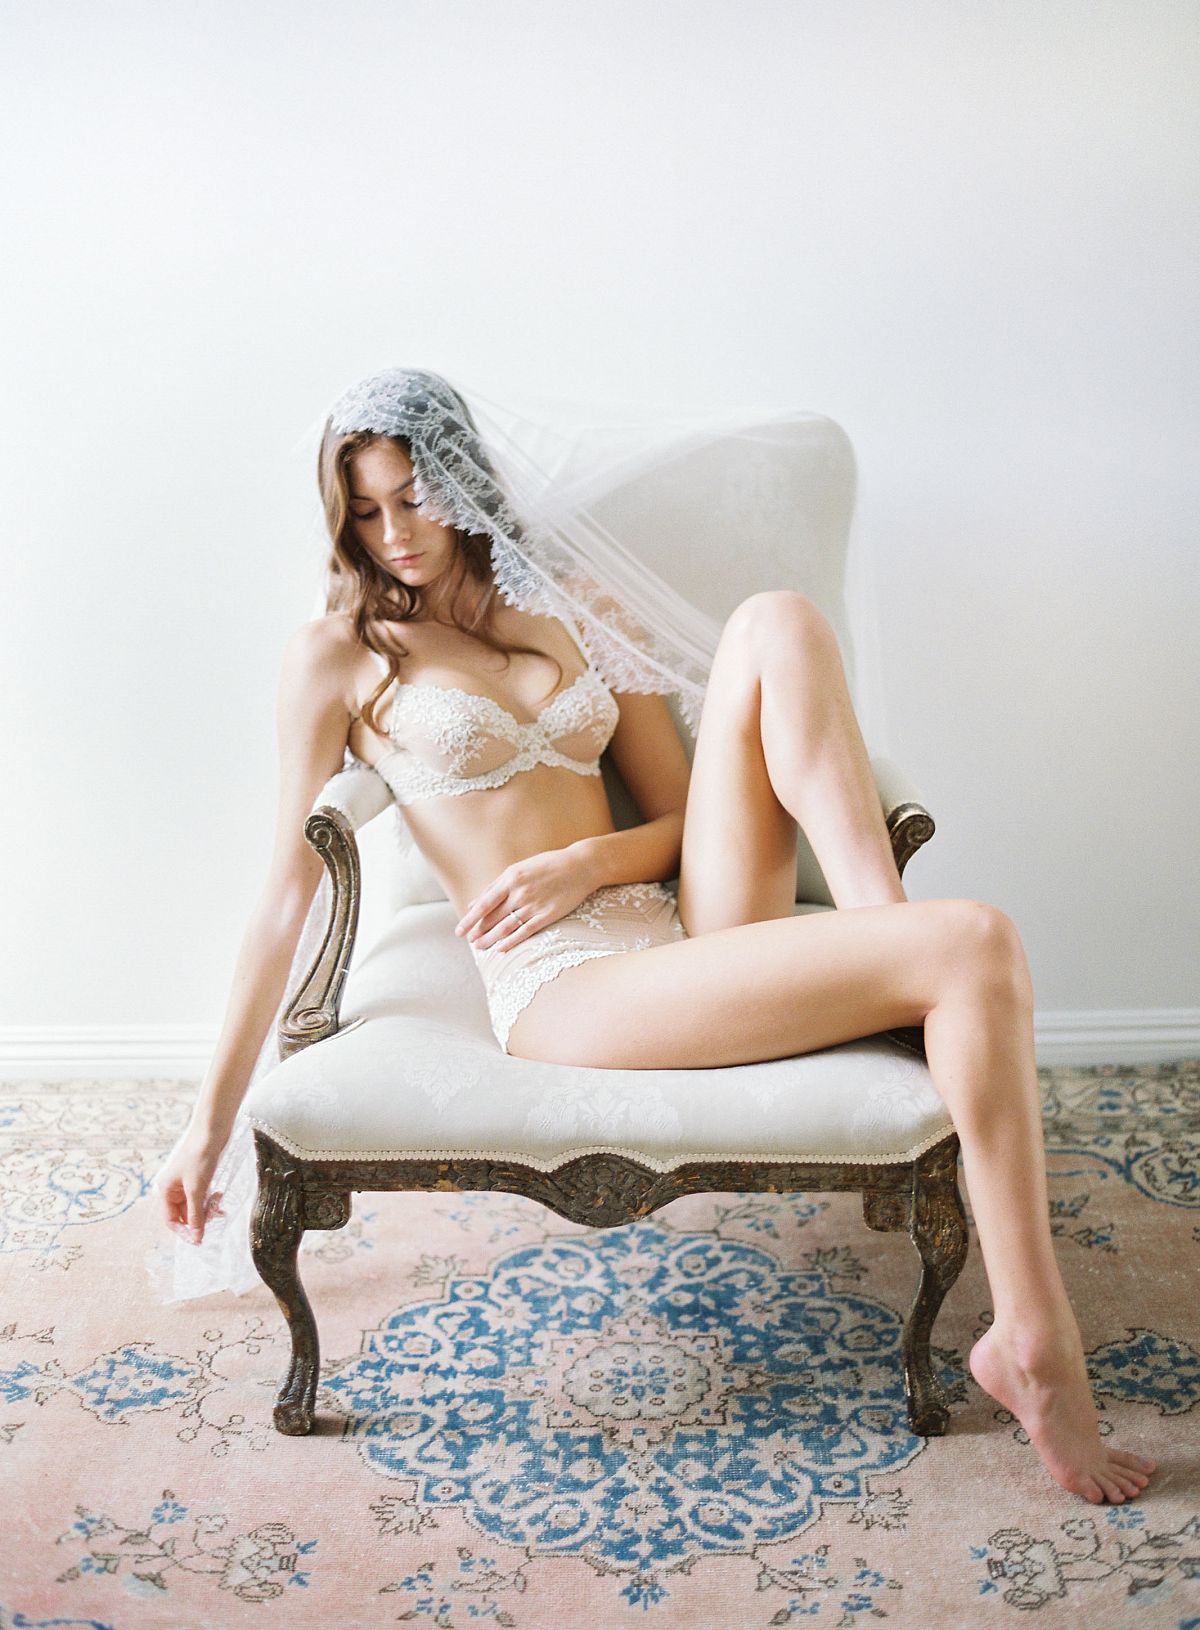 Boudoir Session with Christine Clark with styling by Designs by Hemingway